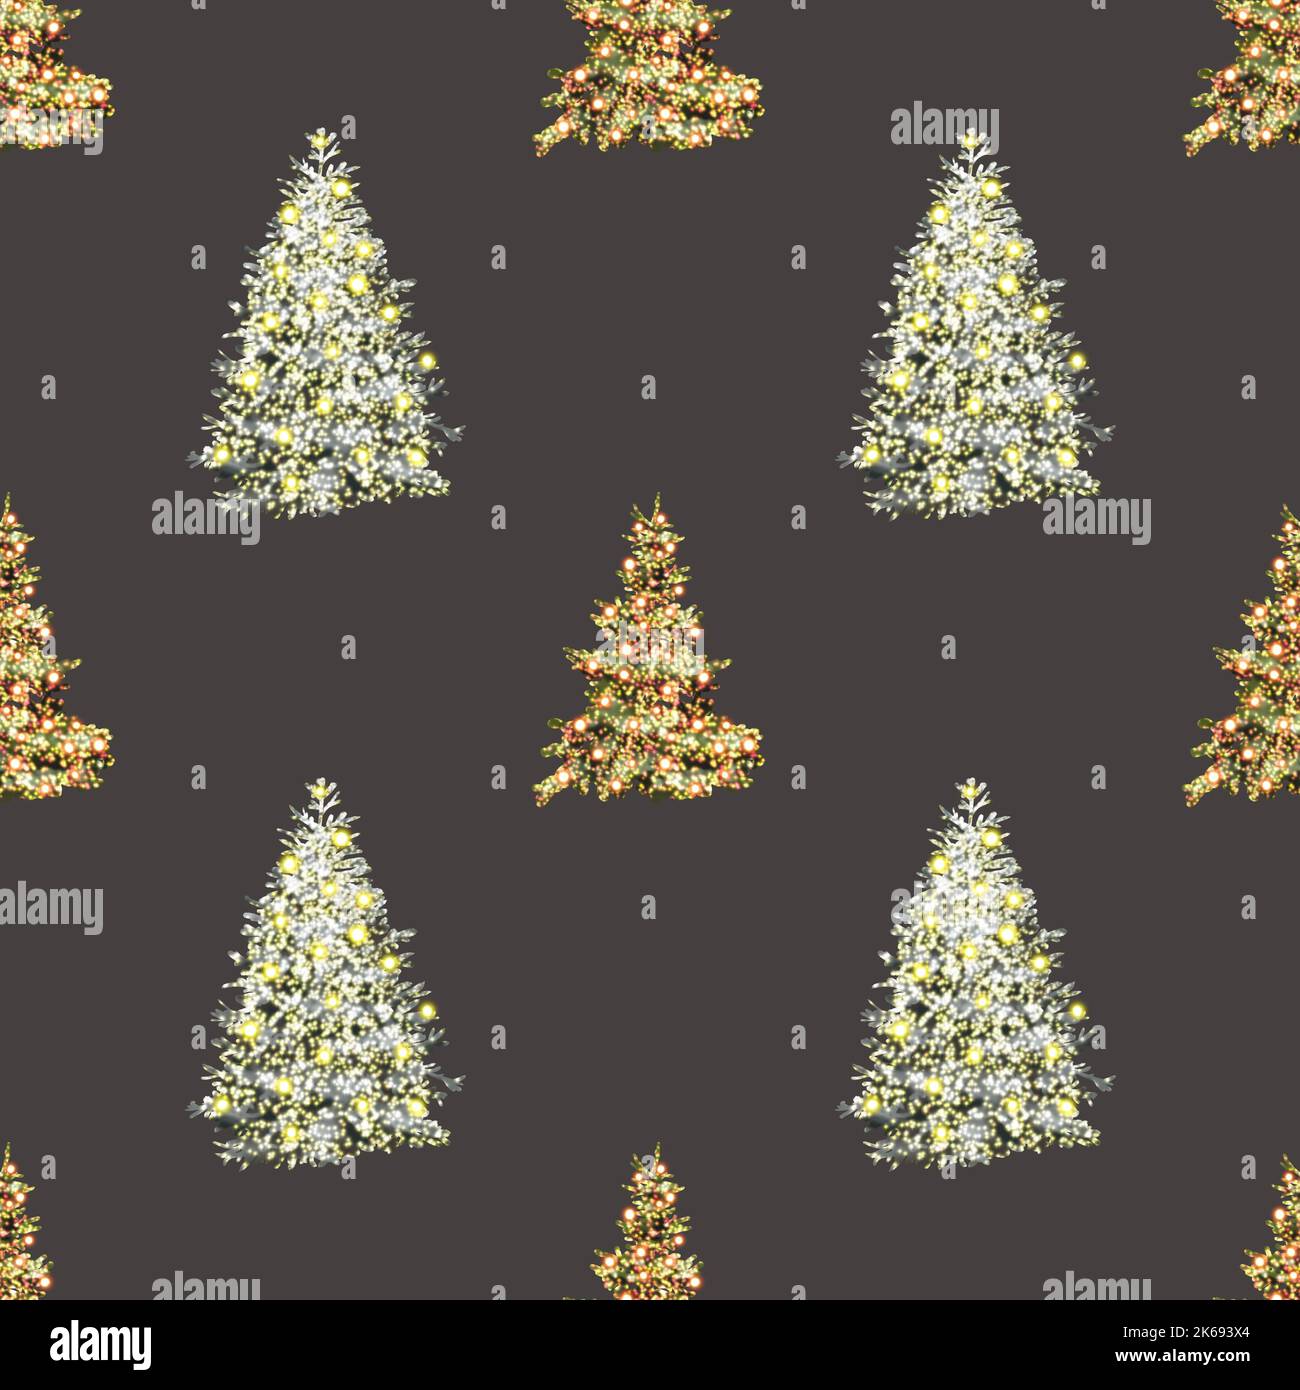 Watercolor seamless pattern of Christmas trees. New Year's Paper Stock Photo